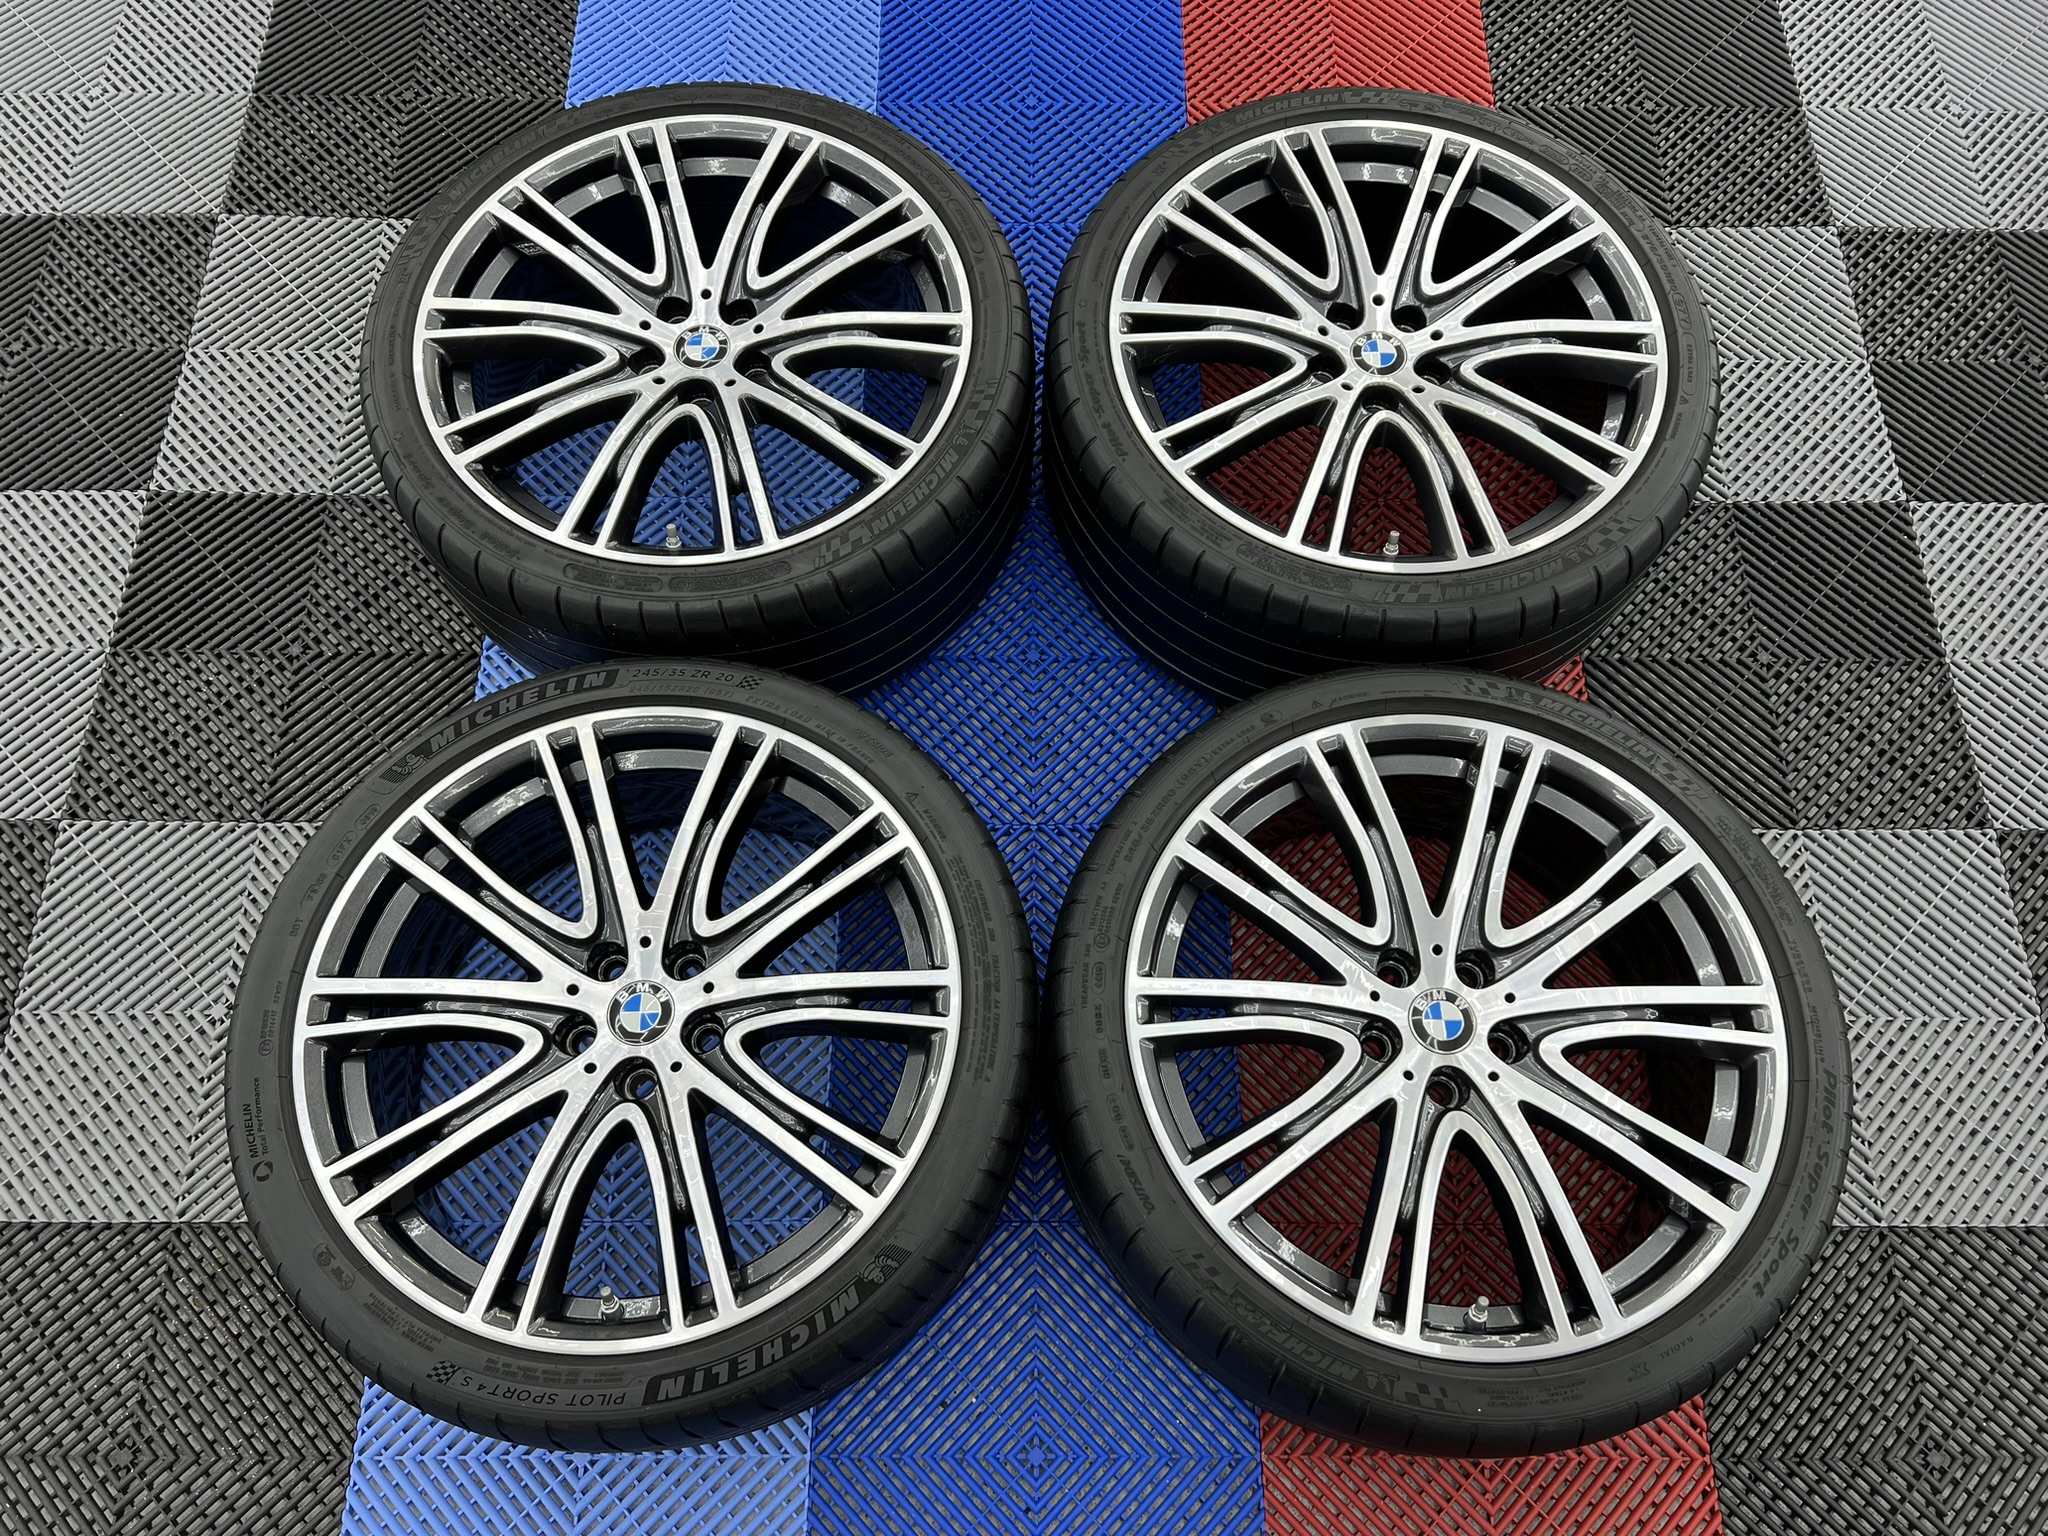 USED 20" GENUINE BMW STYLE 759 ALLOY WHEELS, FULLY REFURBED WIDE REAR, INC MICHELIN NON RUNFLAT TYRES + TPMS